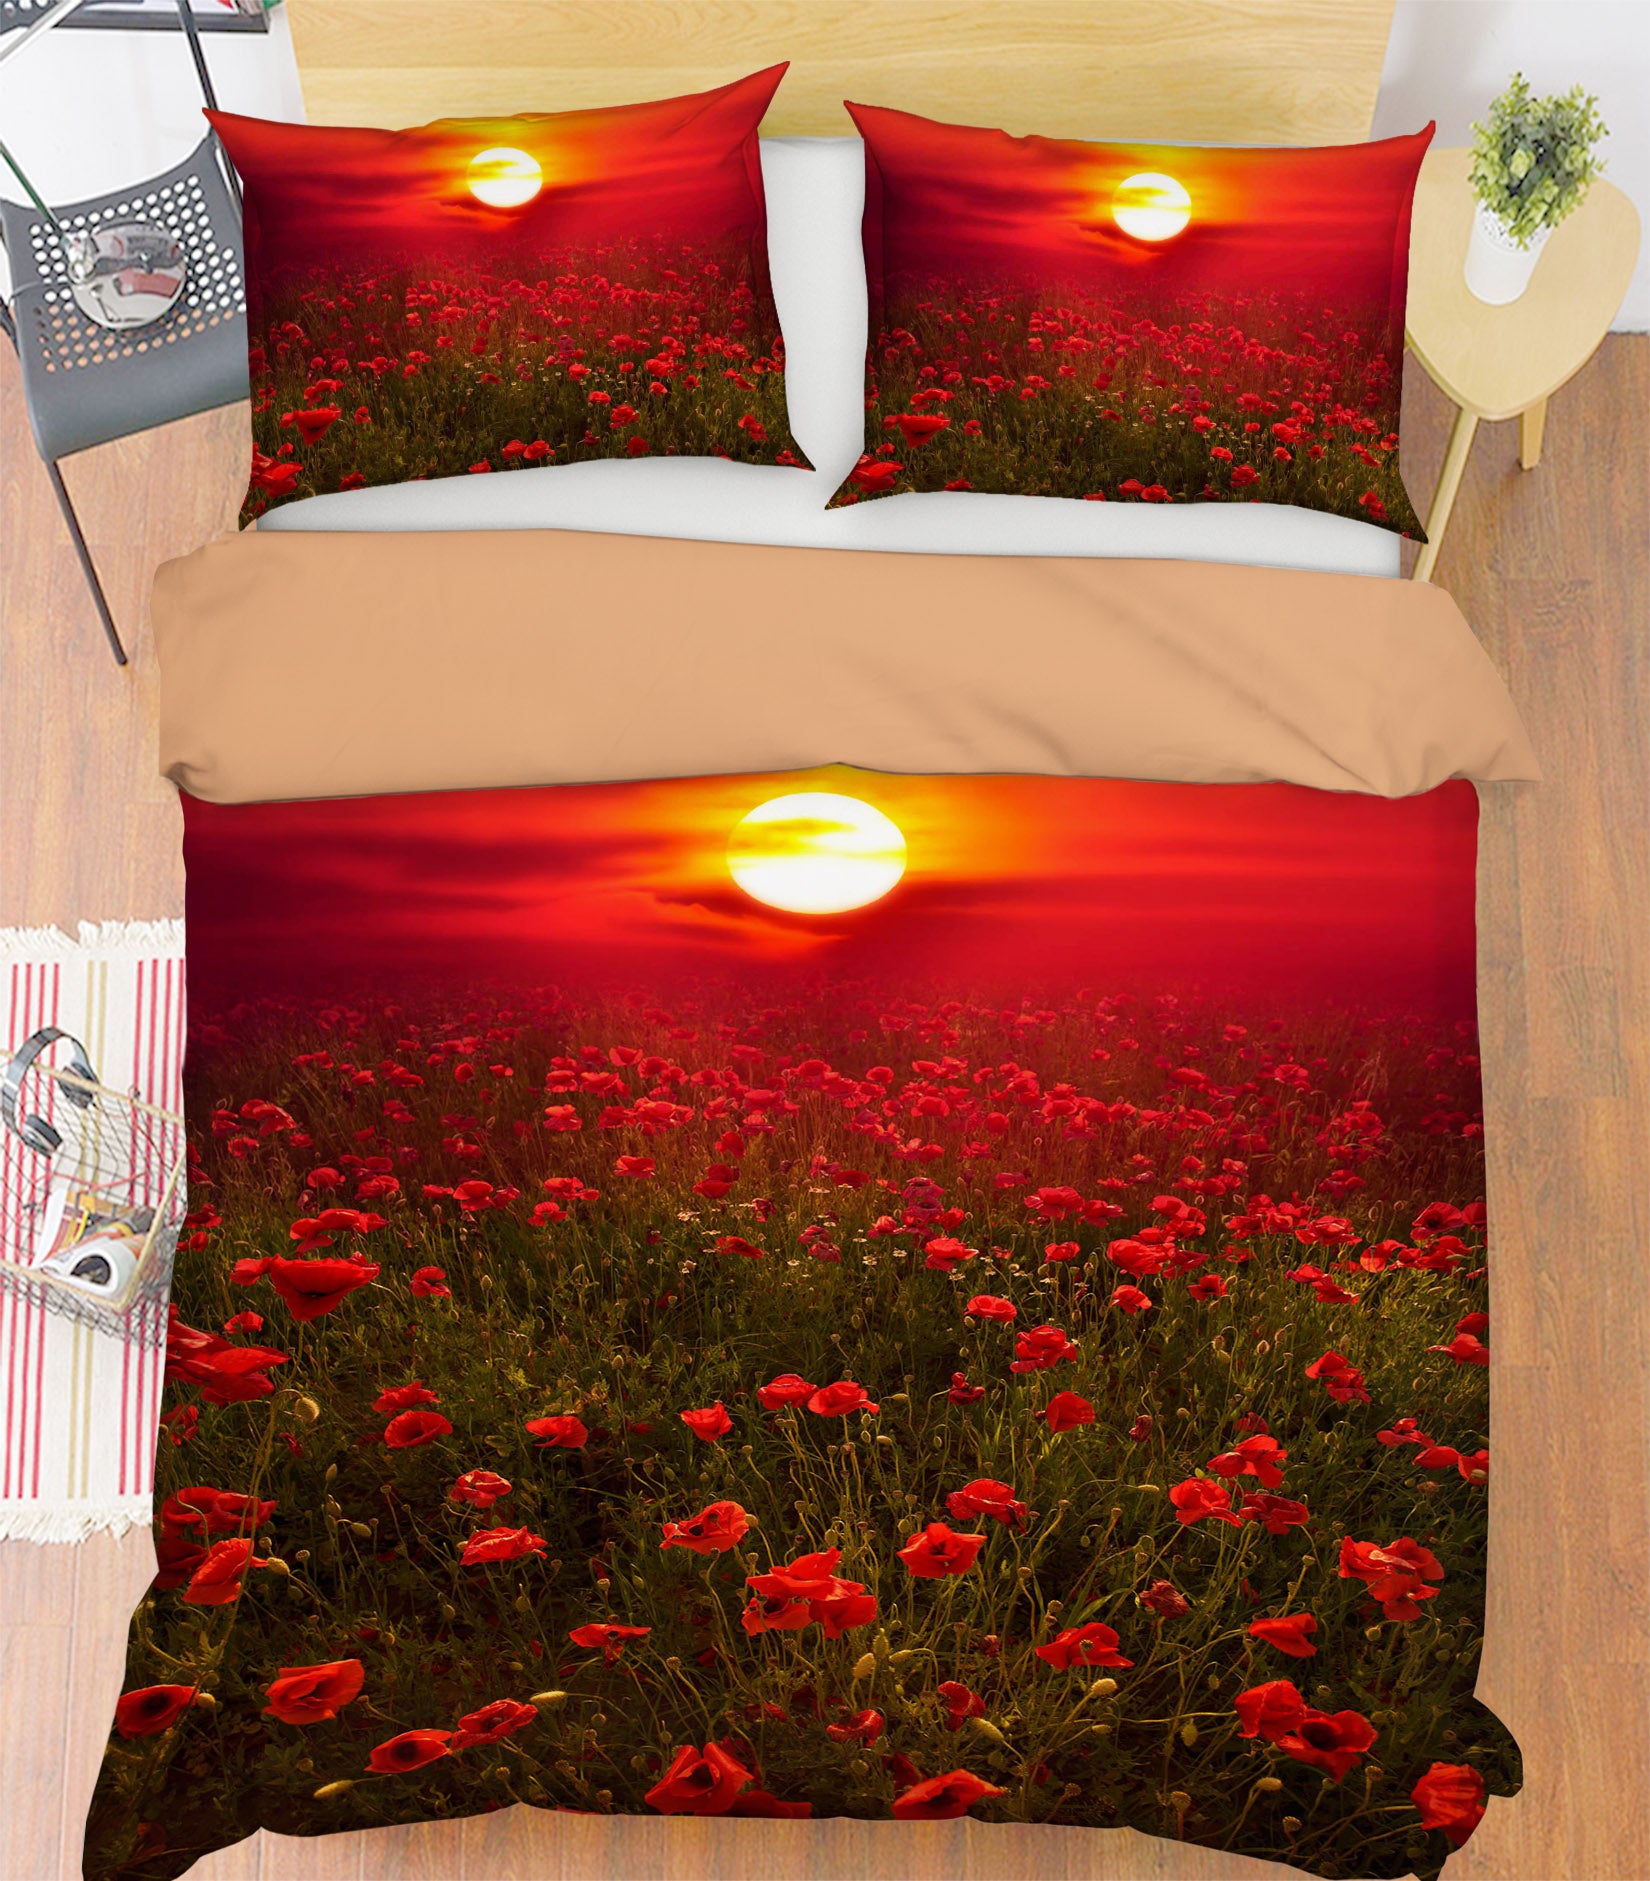 3D Warm Sunset 166 Marco Carmassi Bedding Bed Pillowcases Quilt